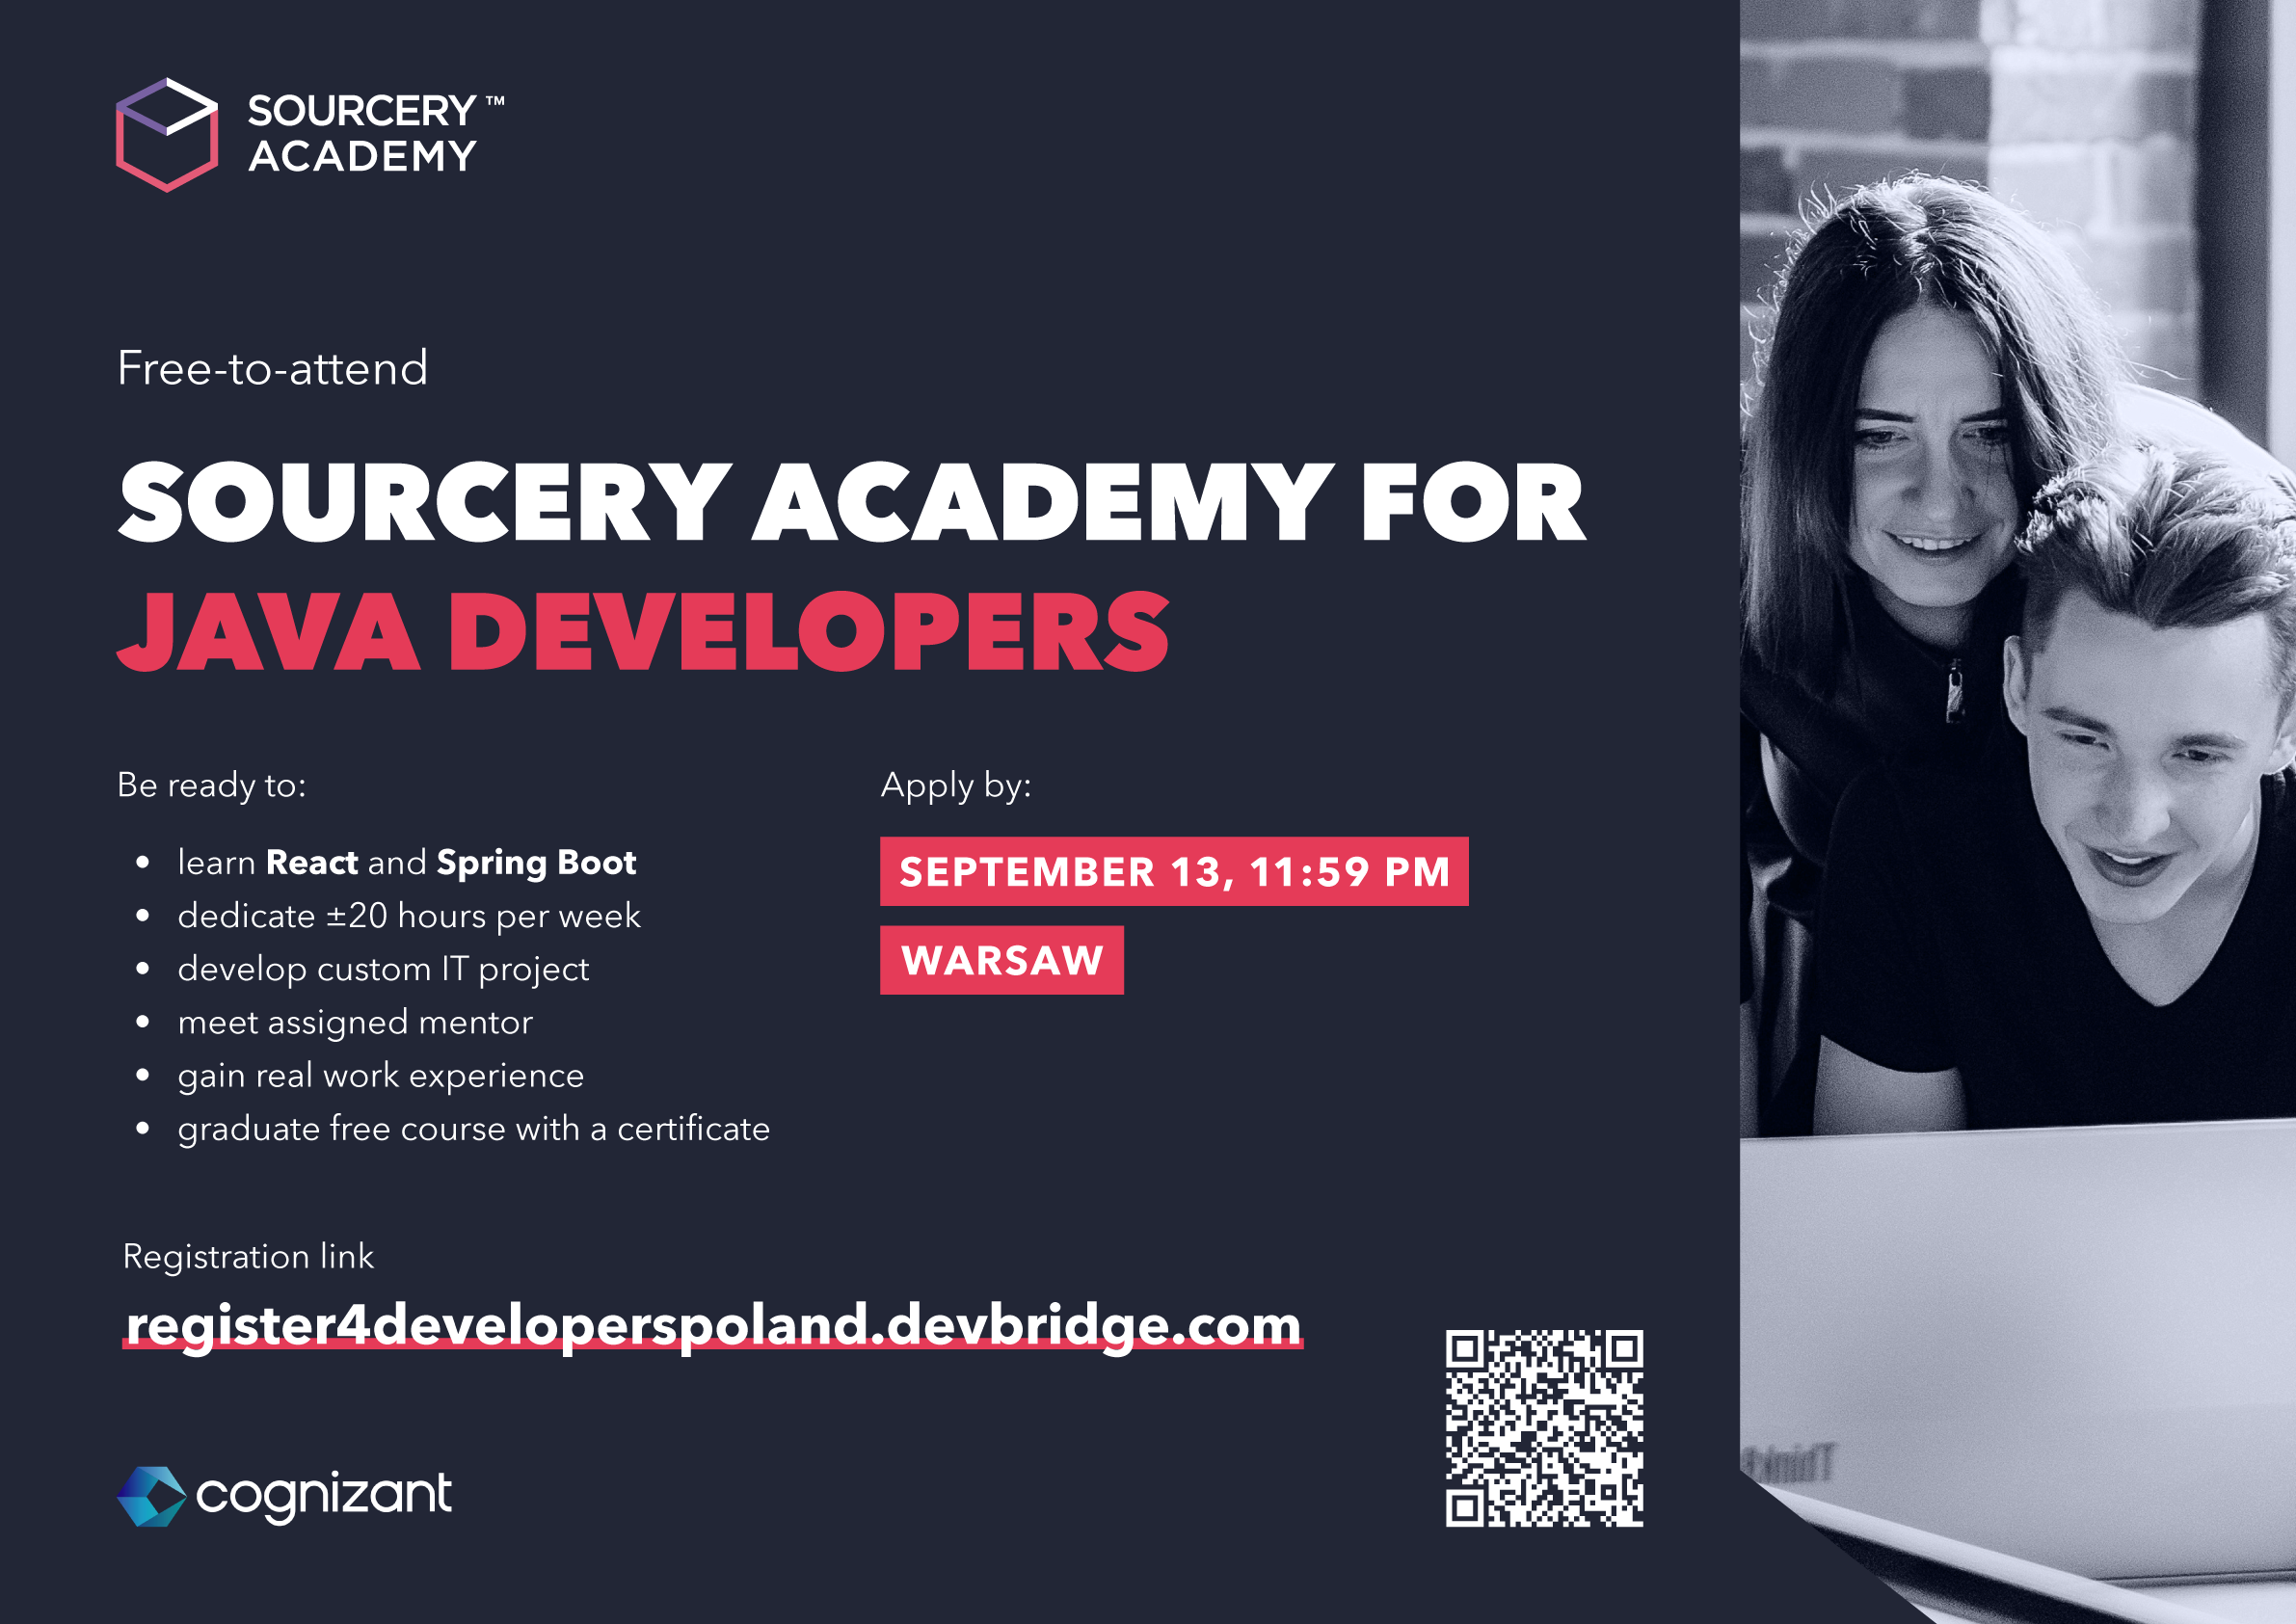 Sourcery Academy for Java Developers